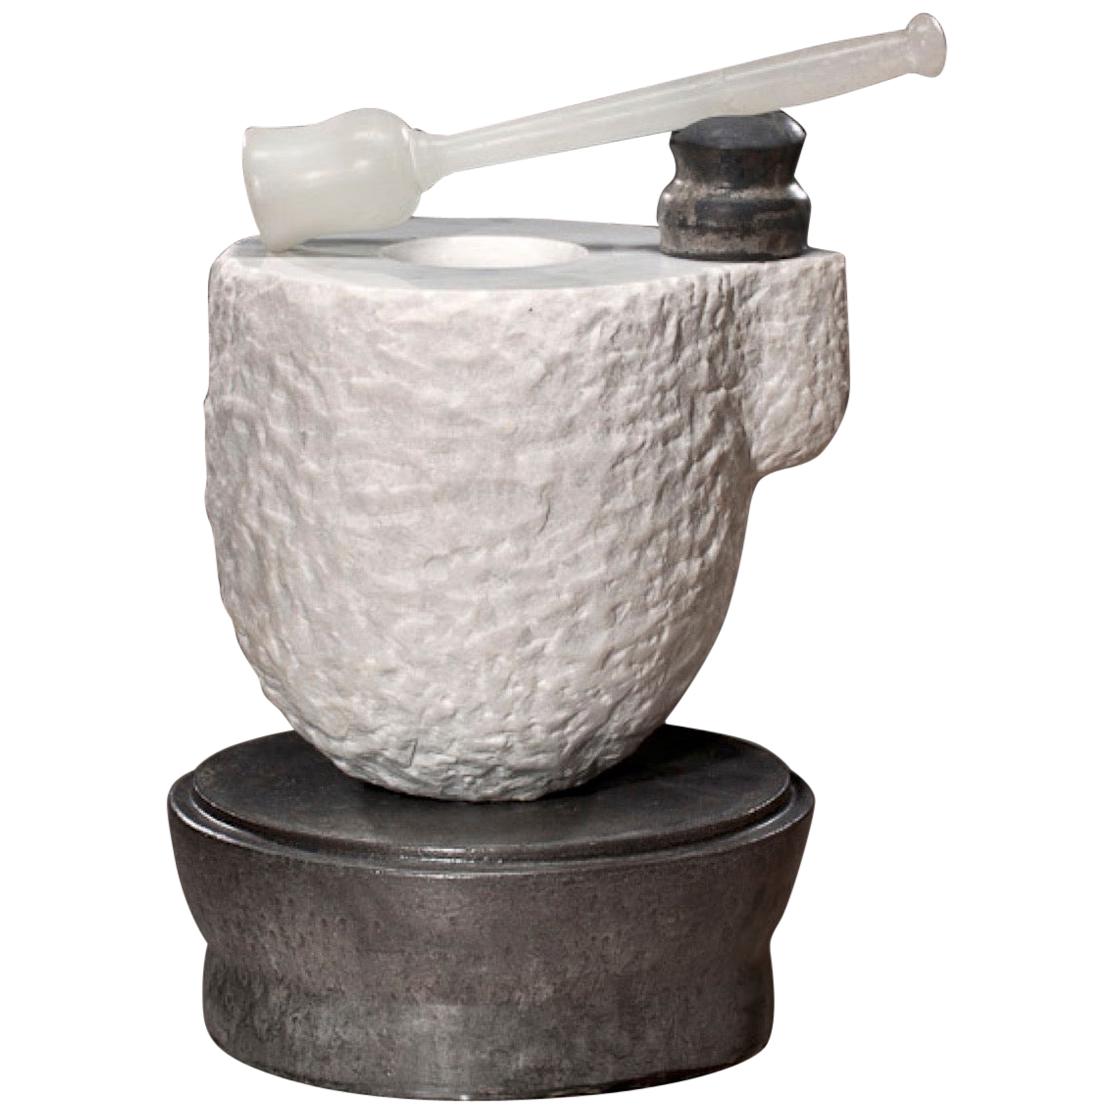 Richard Hirsch White Marble Mortar and Glass Pestle Sculpture, 2006 - 2010 For Sale